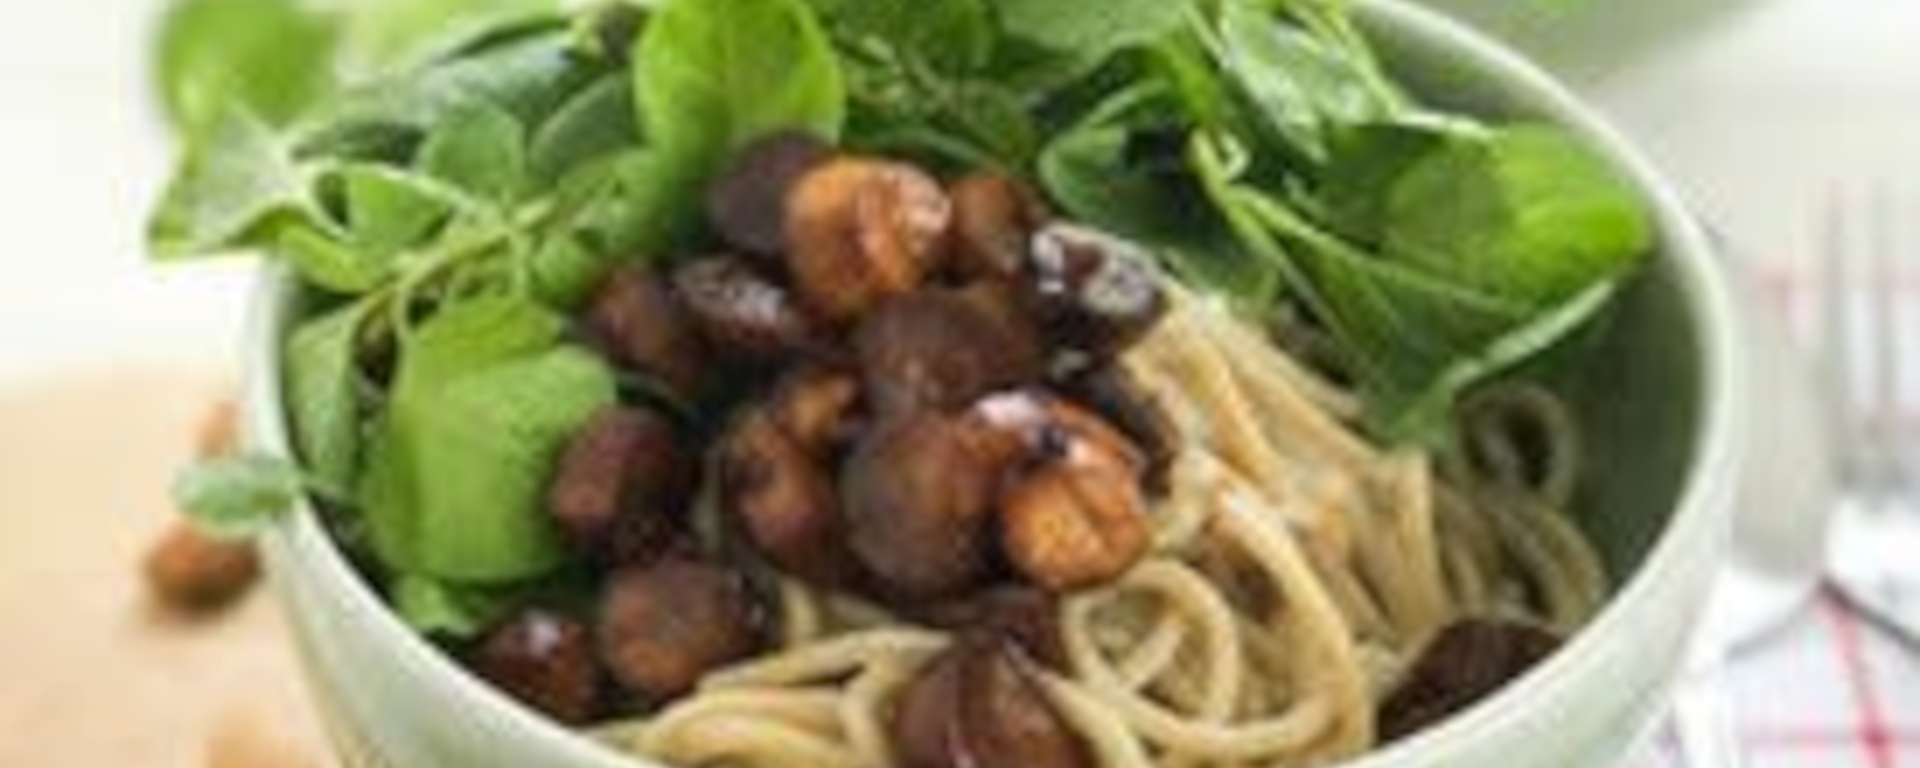 LuvMyRecipe.com - Pasta with Vegan Scallops, Sauce Alfredo and Baby Spinach Featured